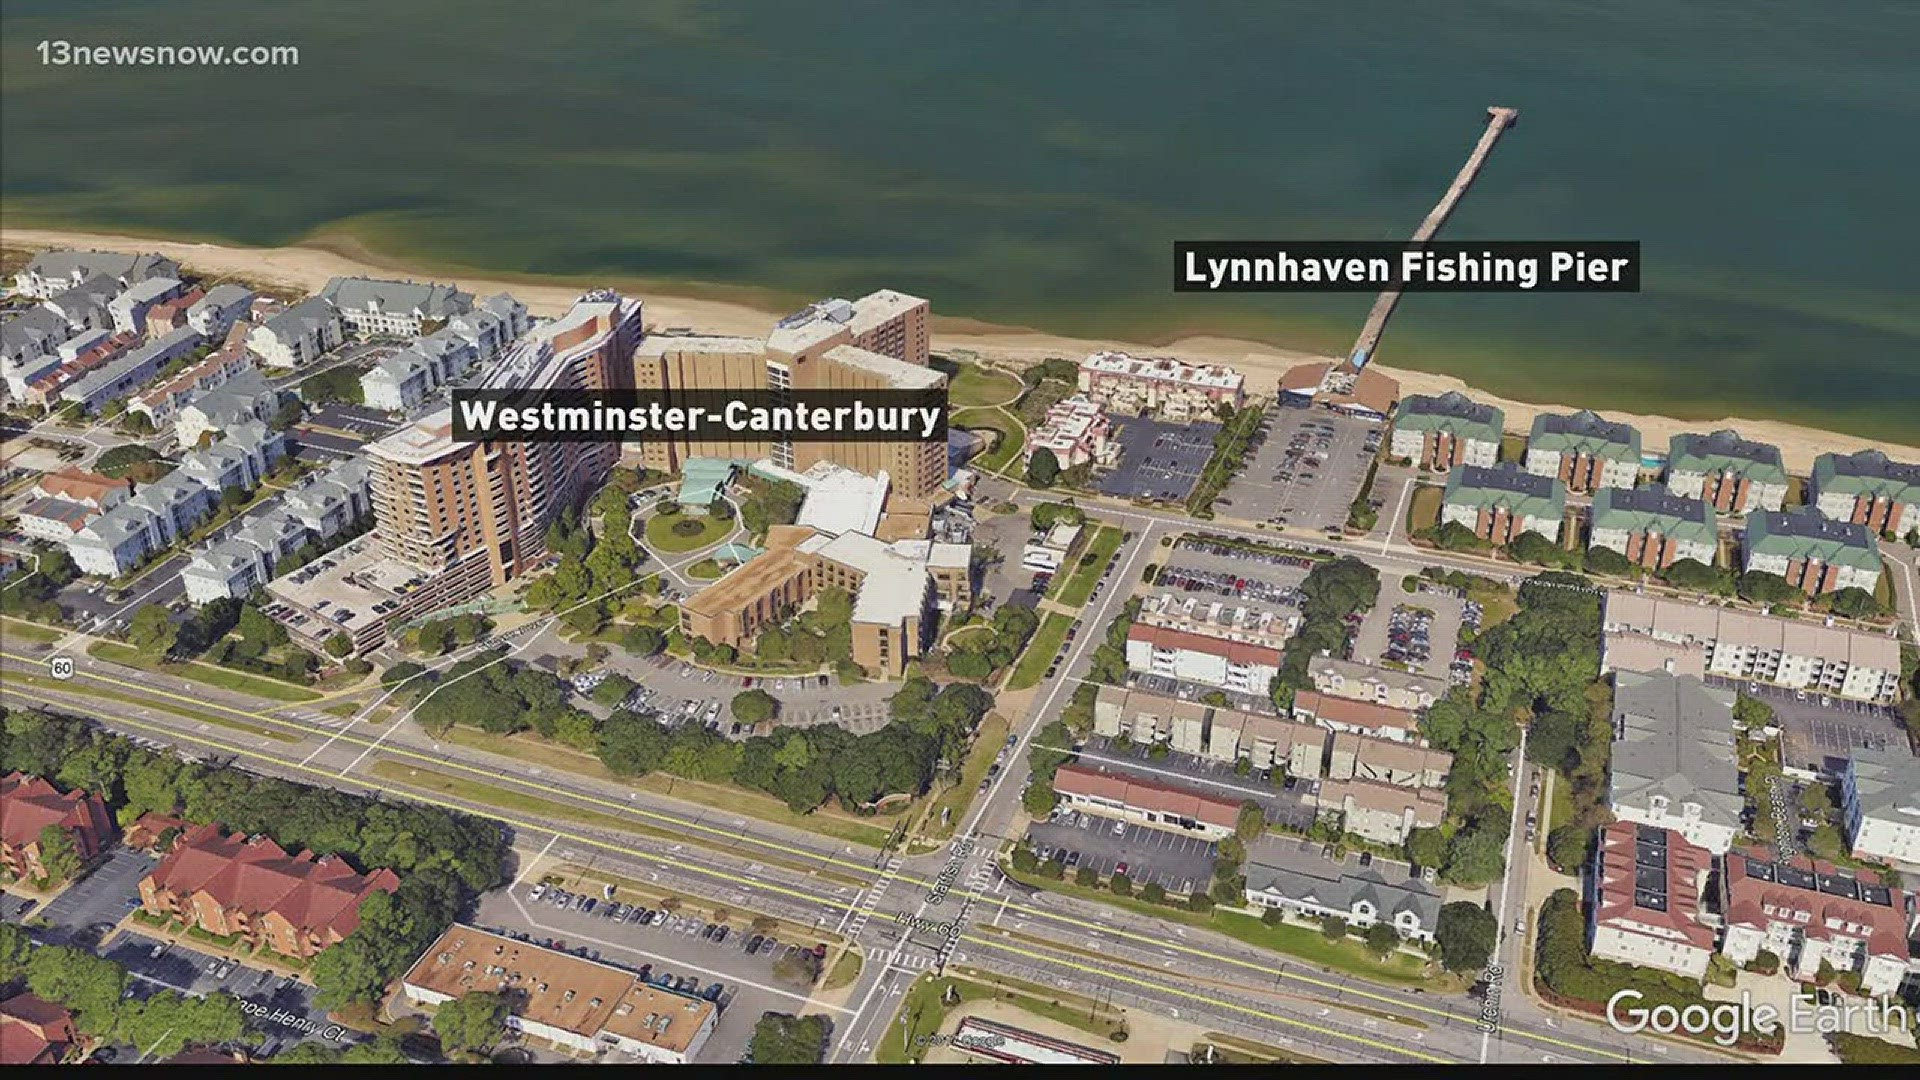 Westminster-Canterbury finally announced they will purchase the Lynnhaven Fishing Pier